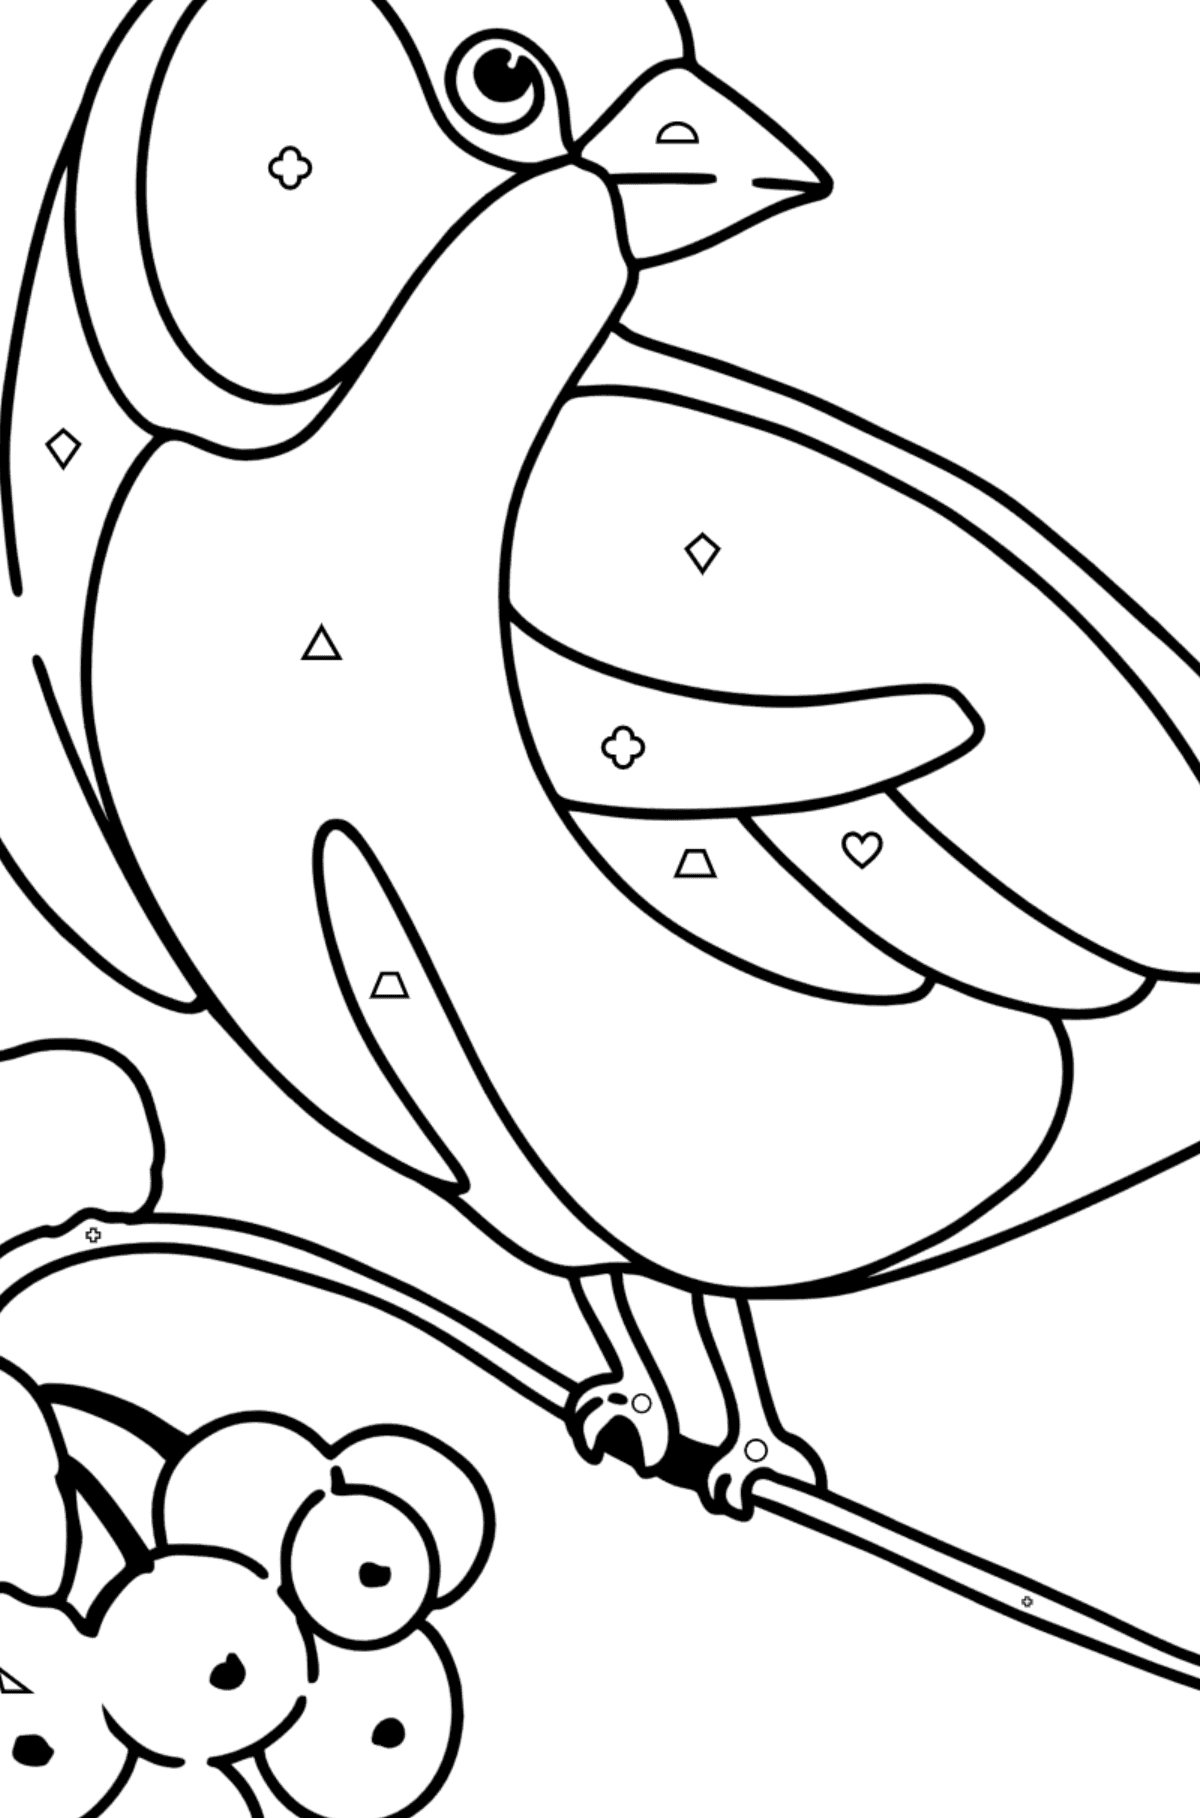 Coloring page - Titmouse on Mountain Ash - Coloring by Geometric Shapes for Kids